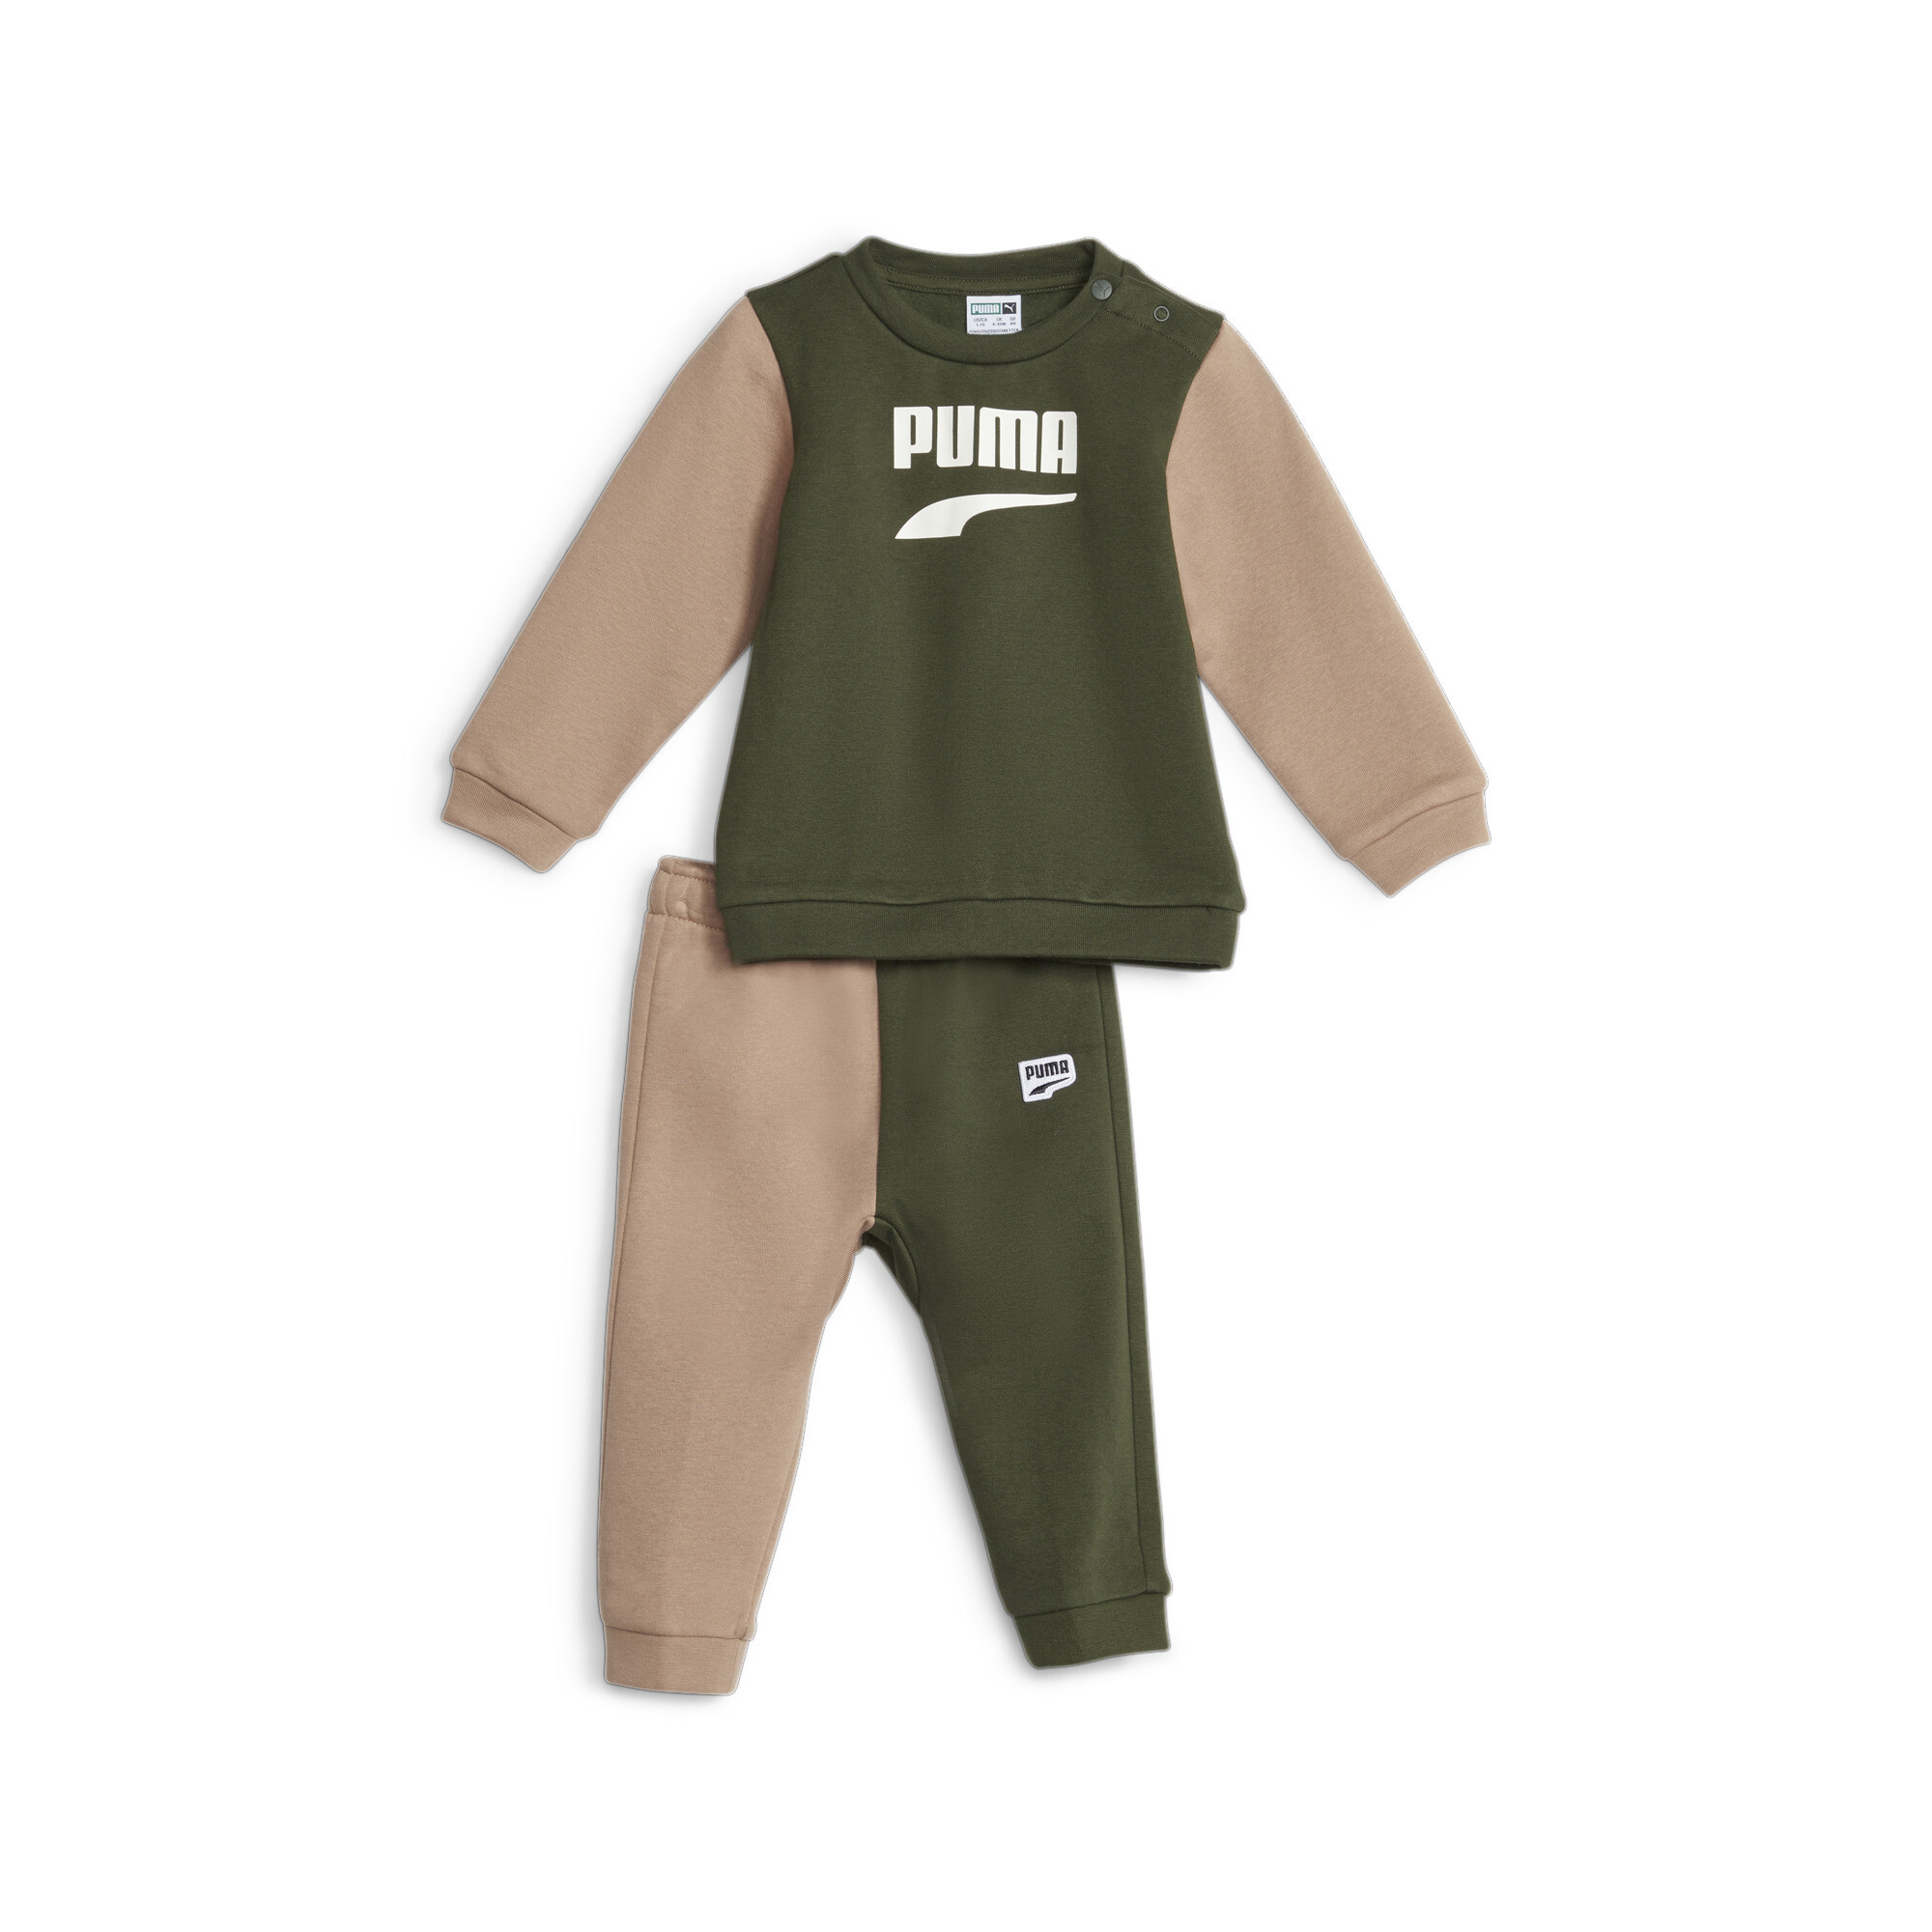 Puma Minicats Downtown Toddlers' Set, Green, Size 2-4M, Clothing